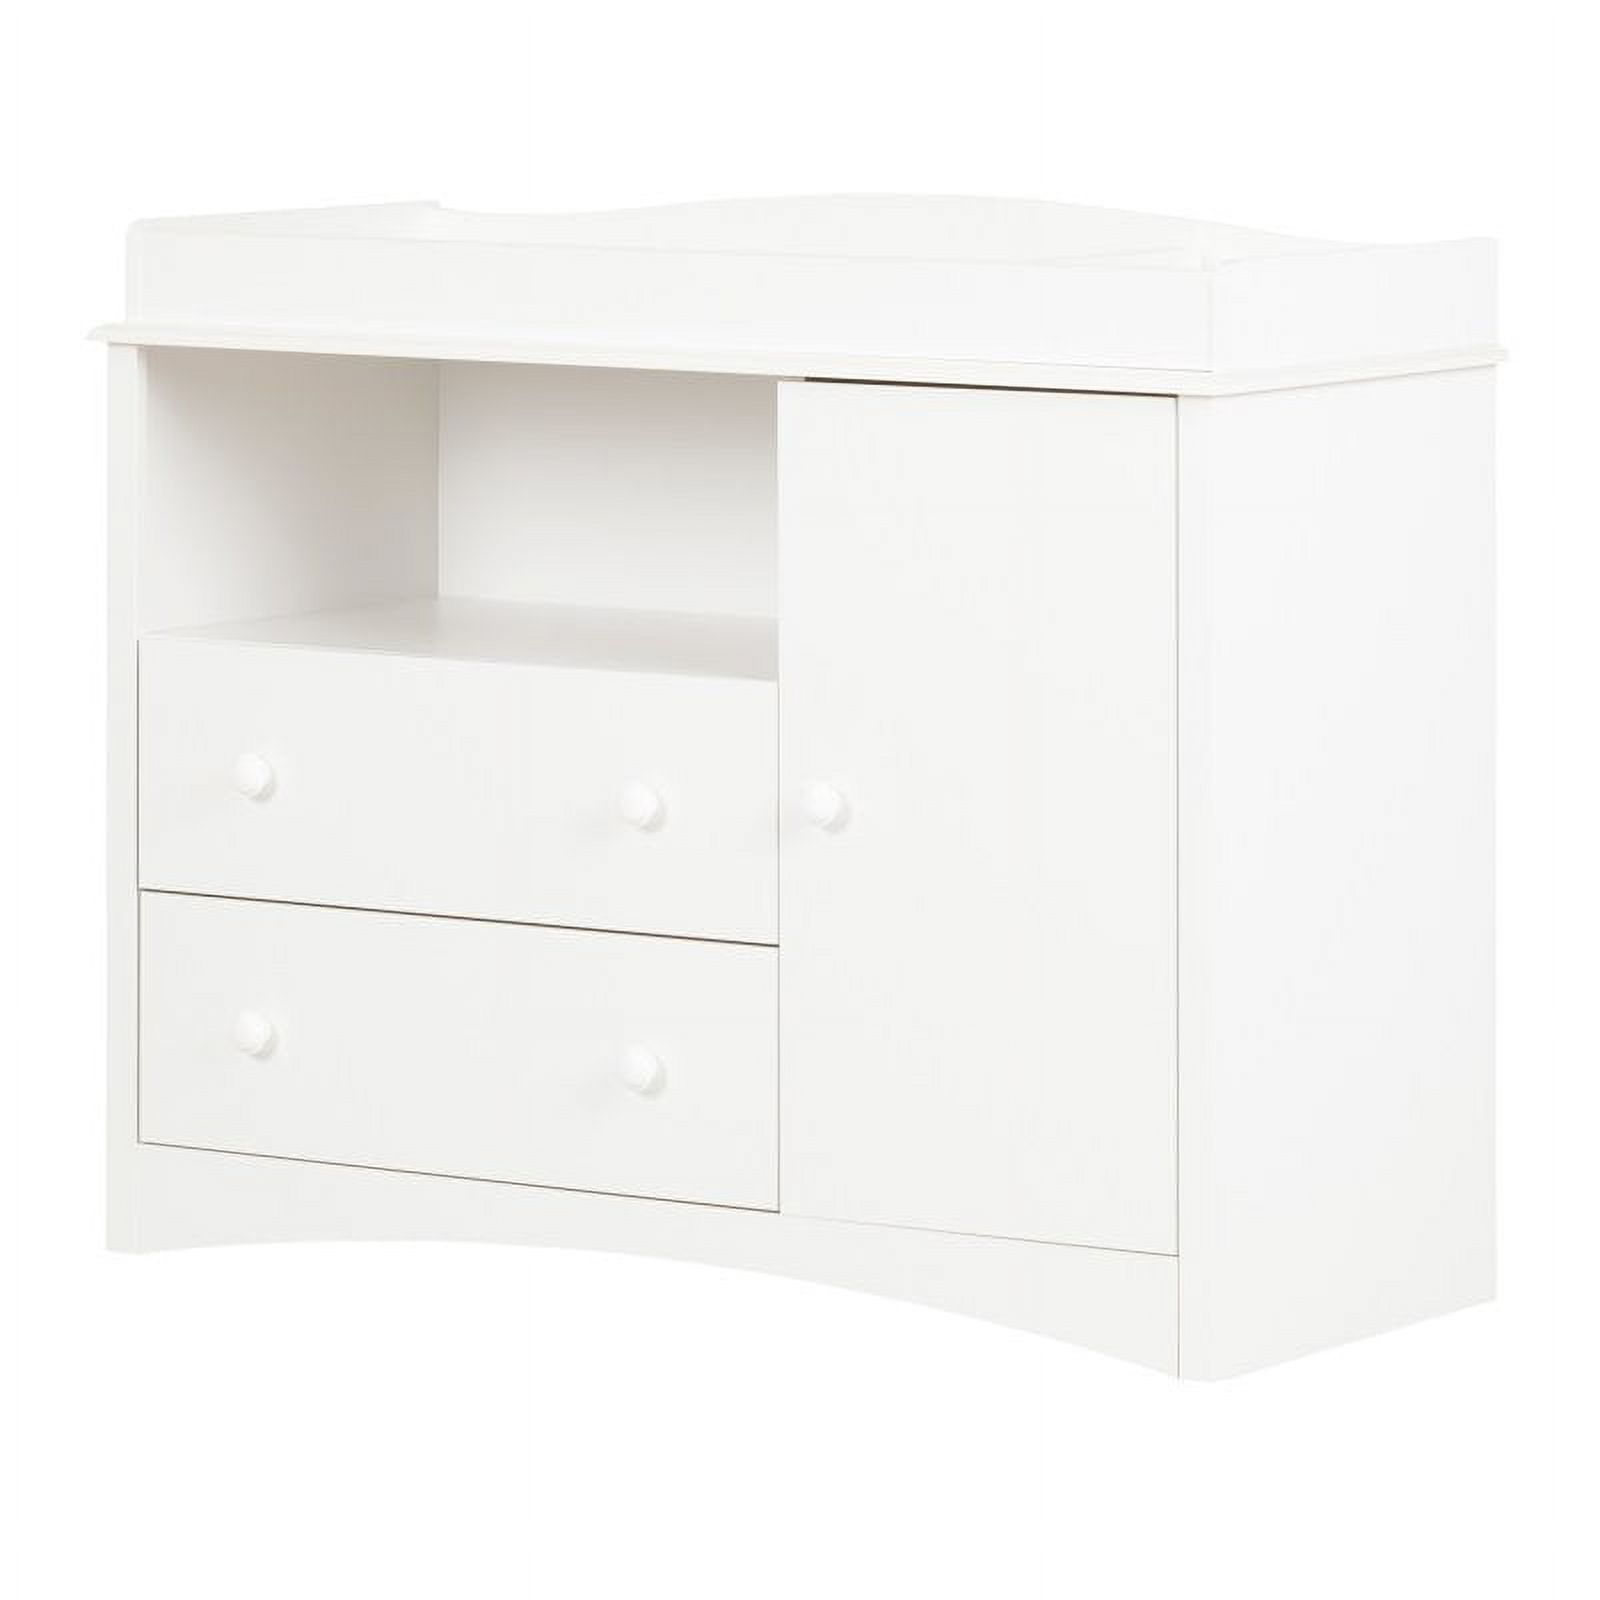 South Shore Furniture South Shore Peek-a-boo Changing Table, Pure White - image 1 of 4